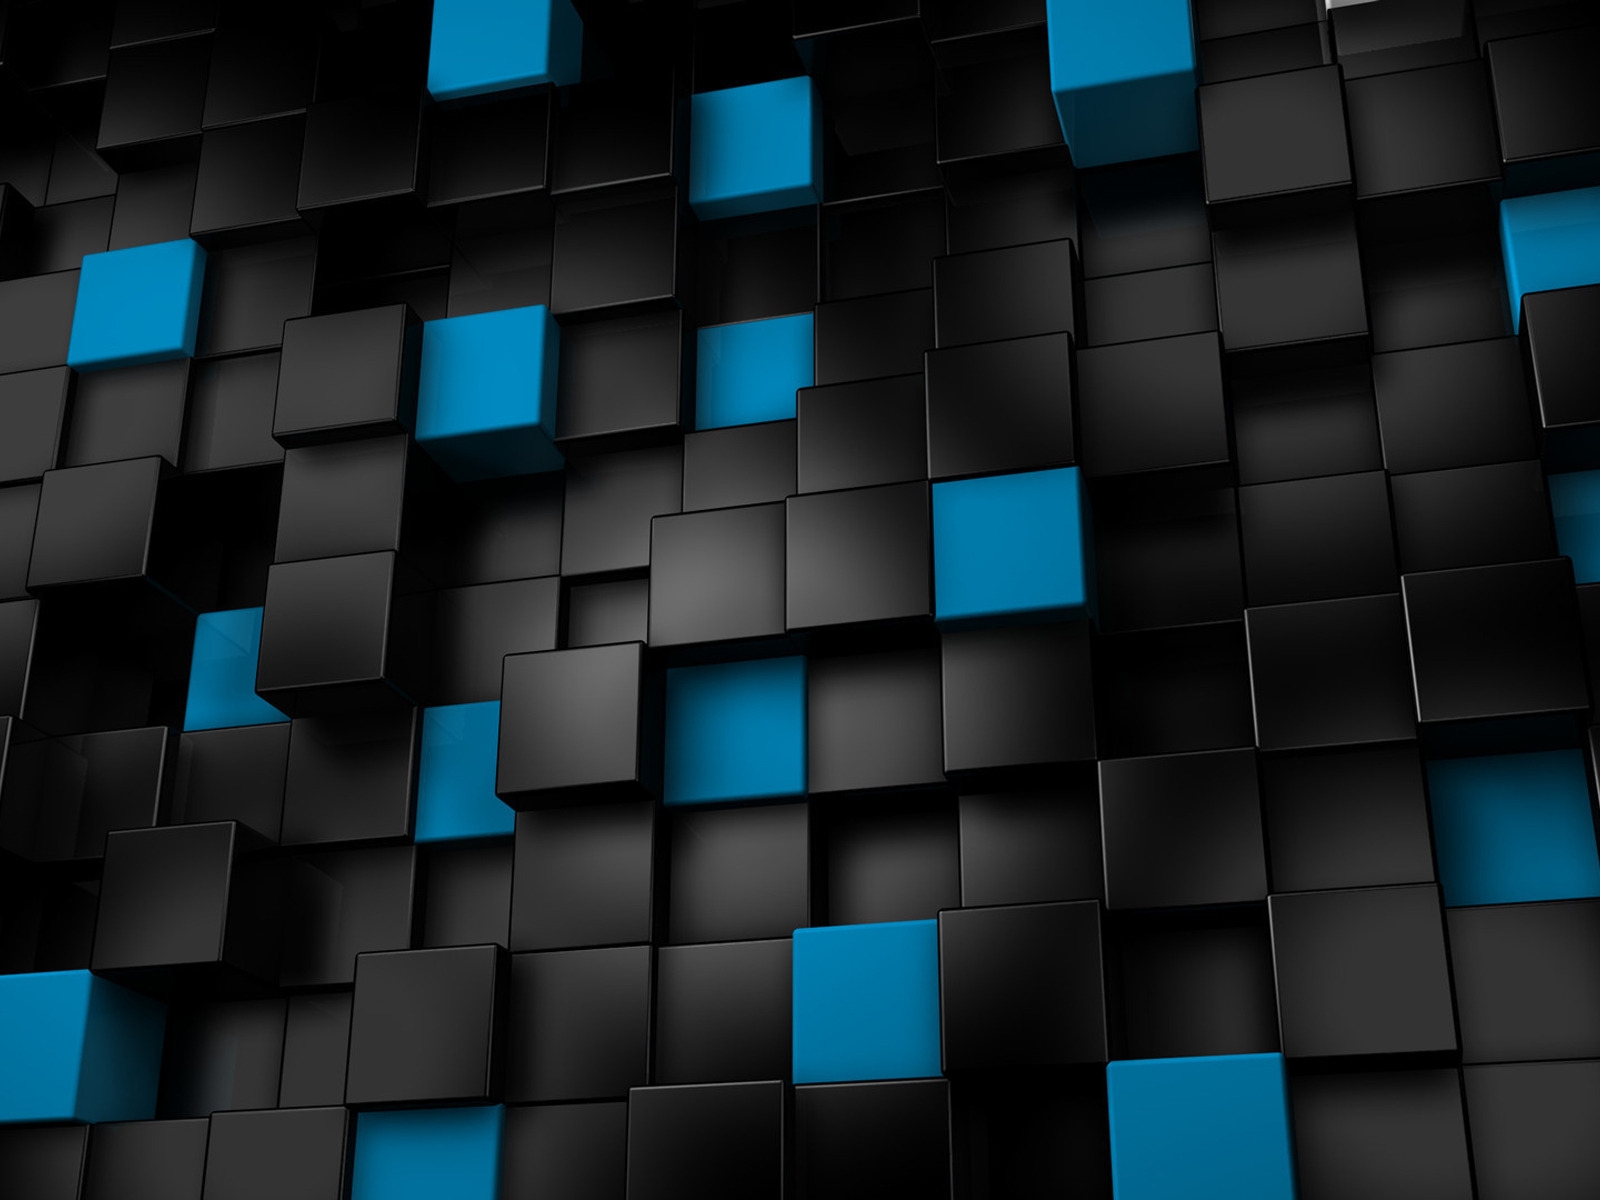 Black & Blue Cubes for 1600 x 1200 resolution